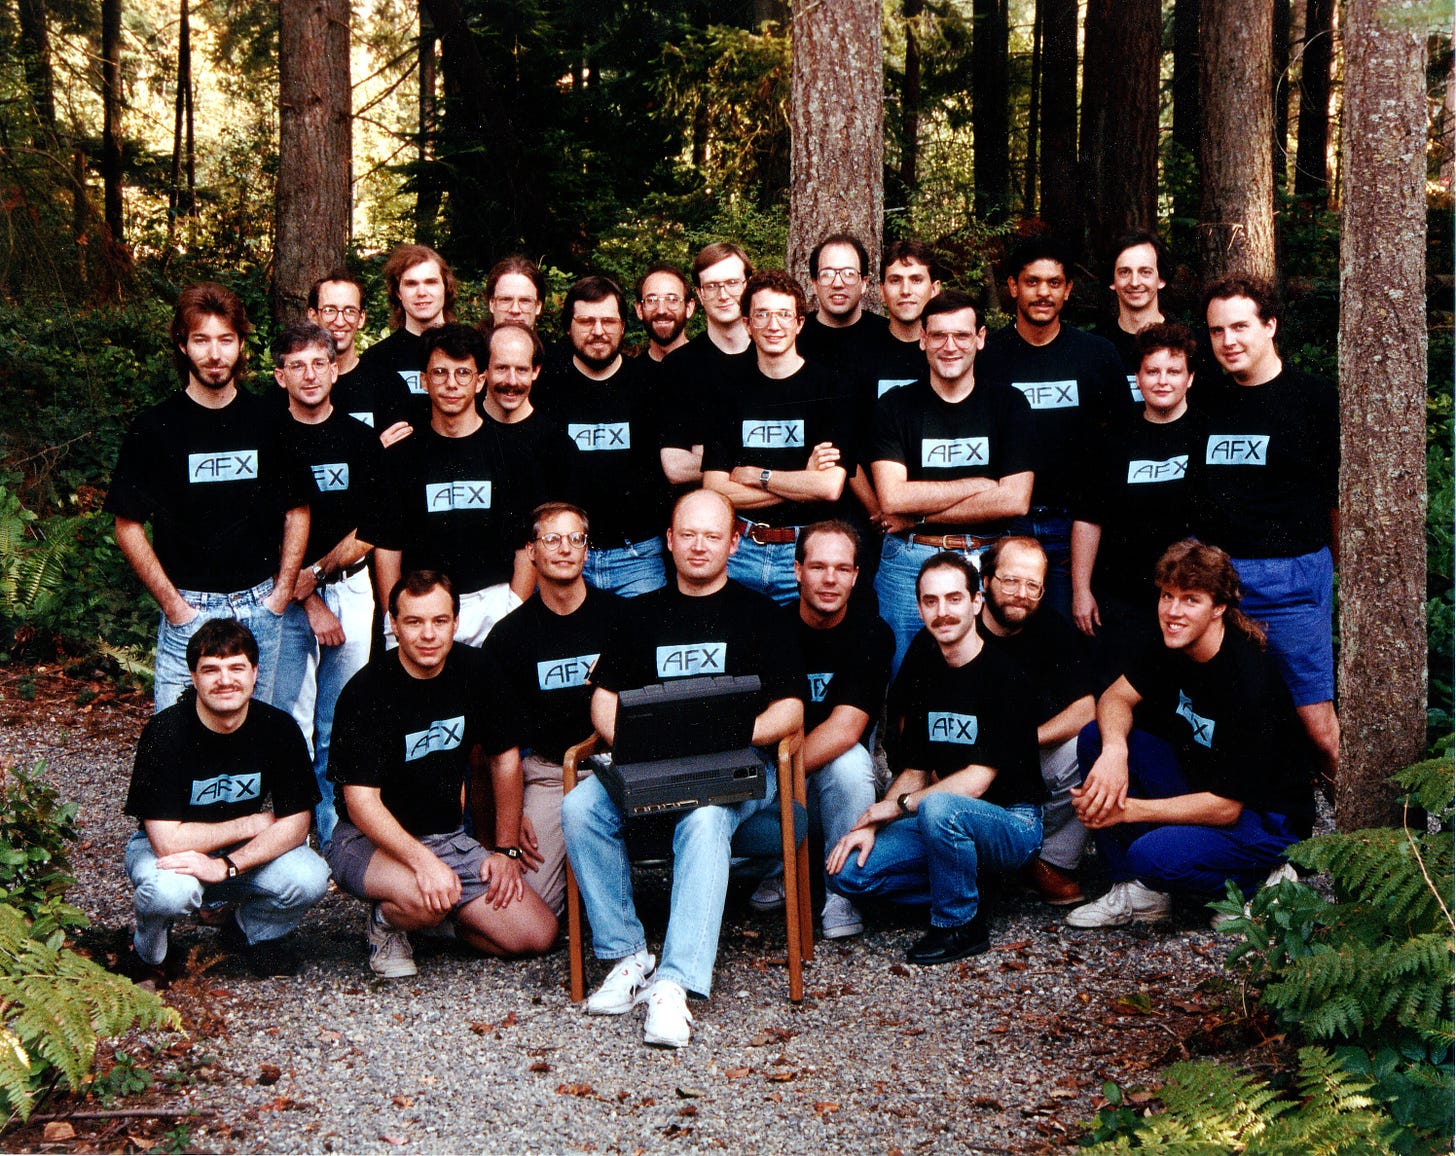 A group photo of 26 members of the AF team.